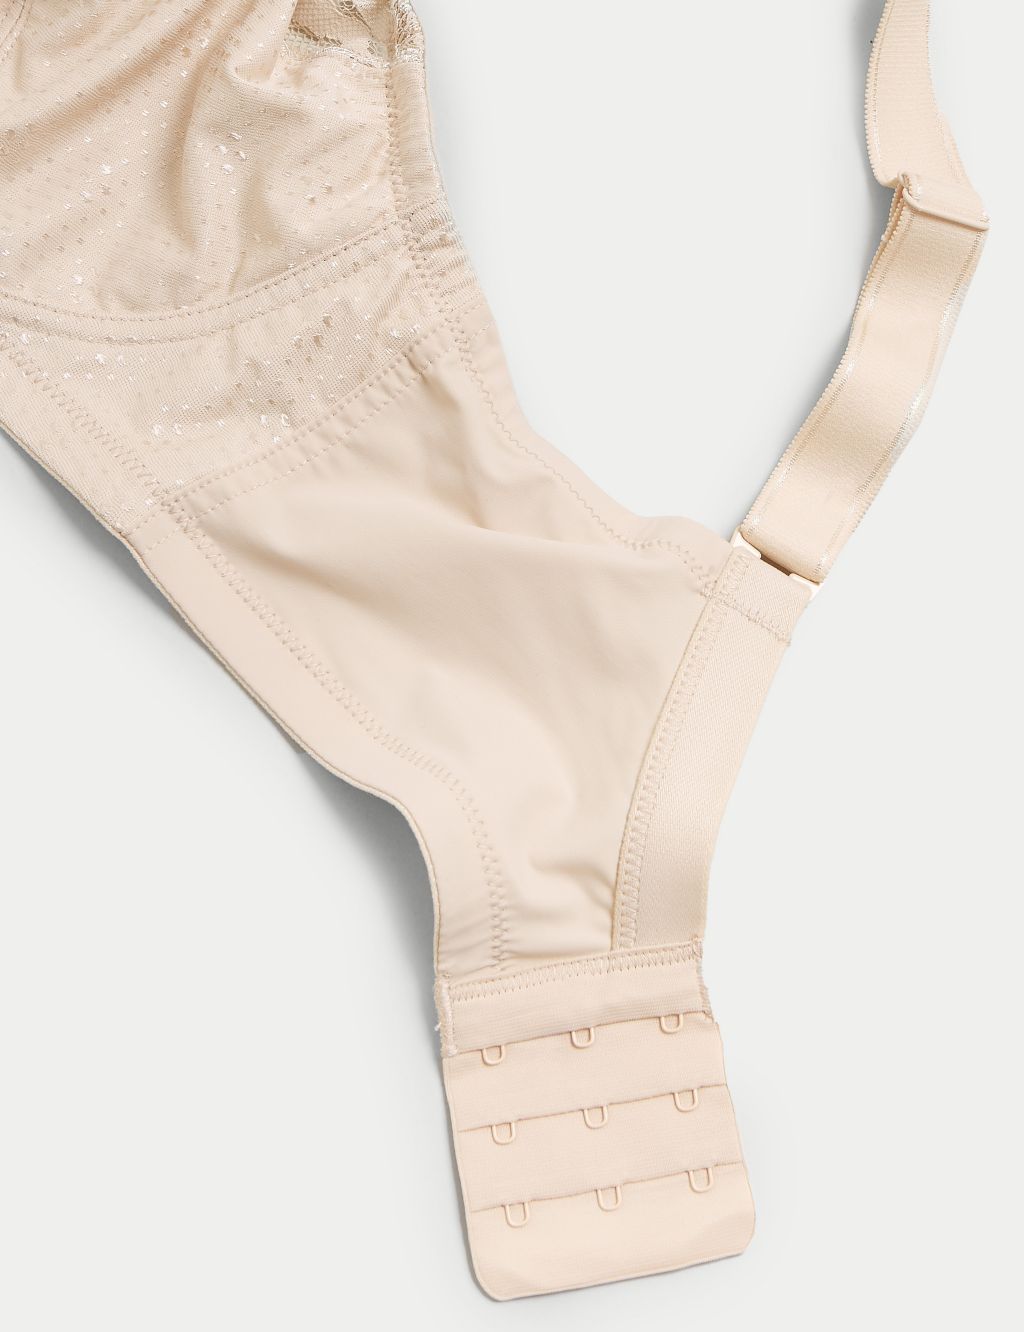 Total Support Wildblooms Non-Wired Bra B-H image 6